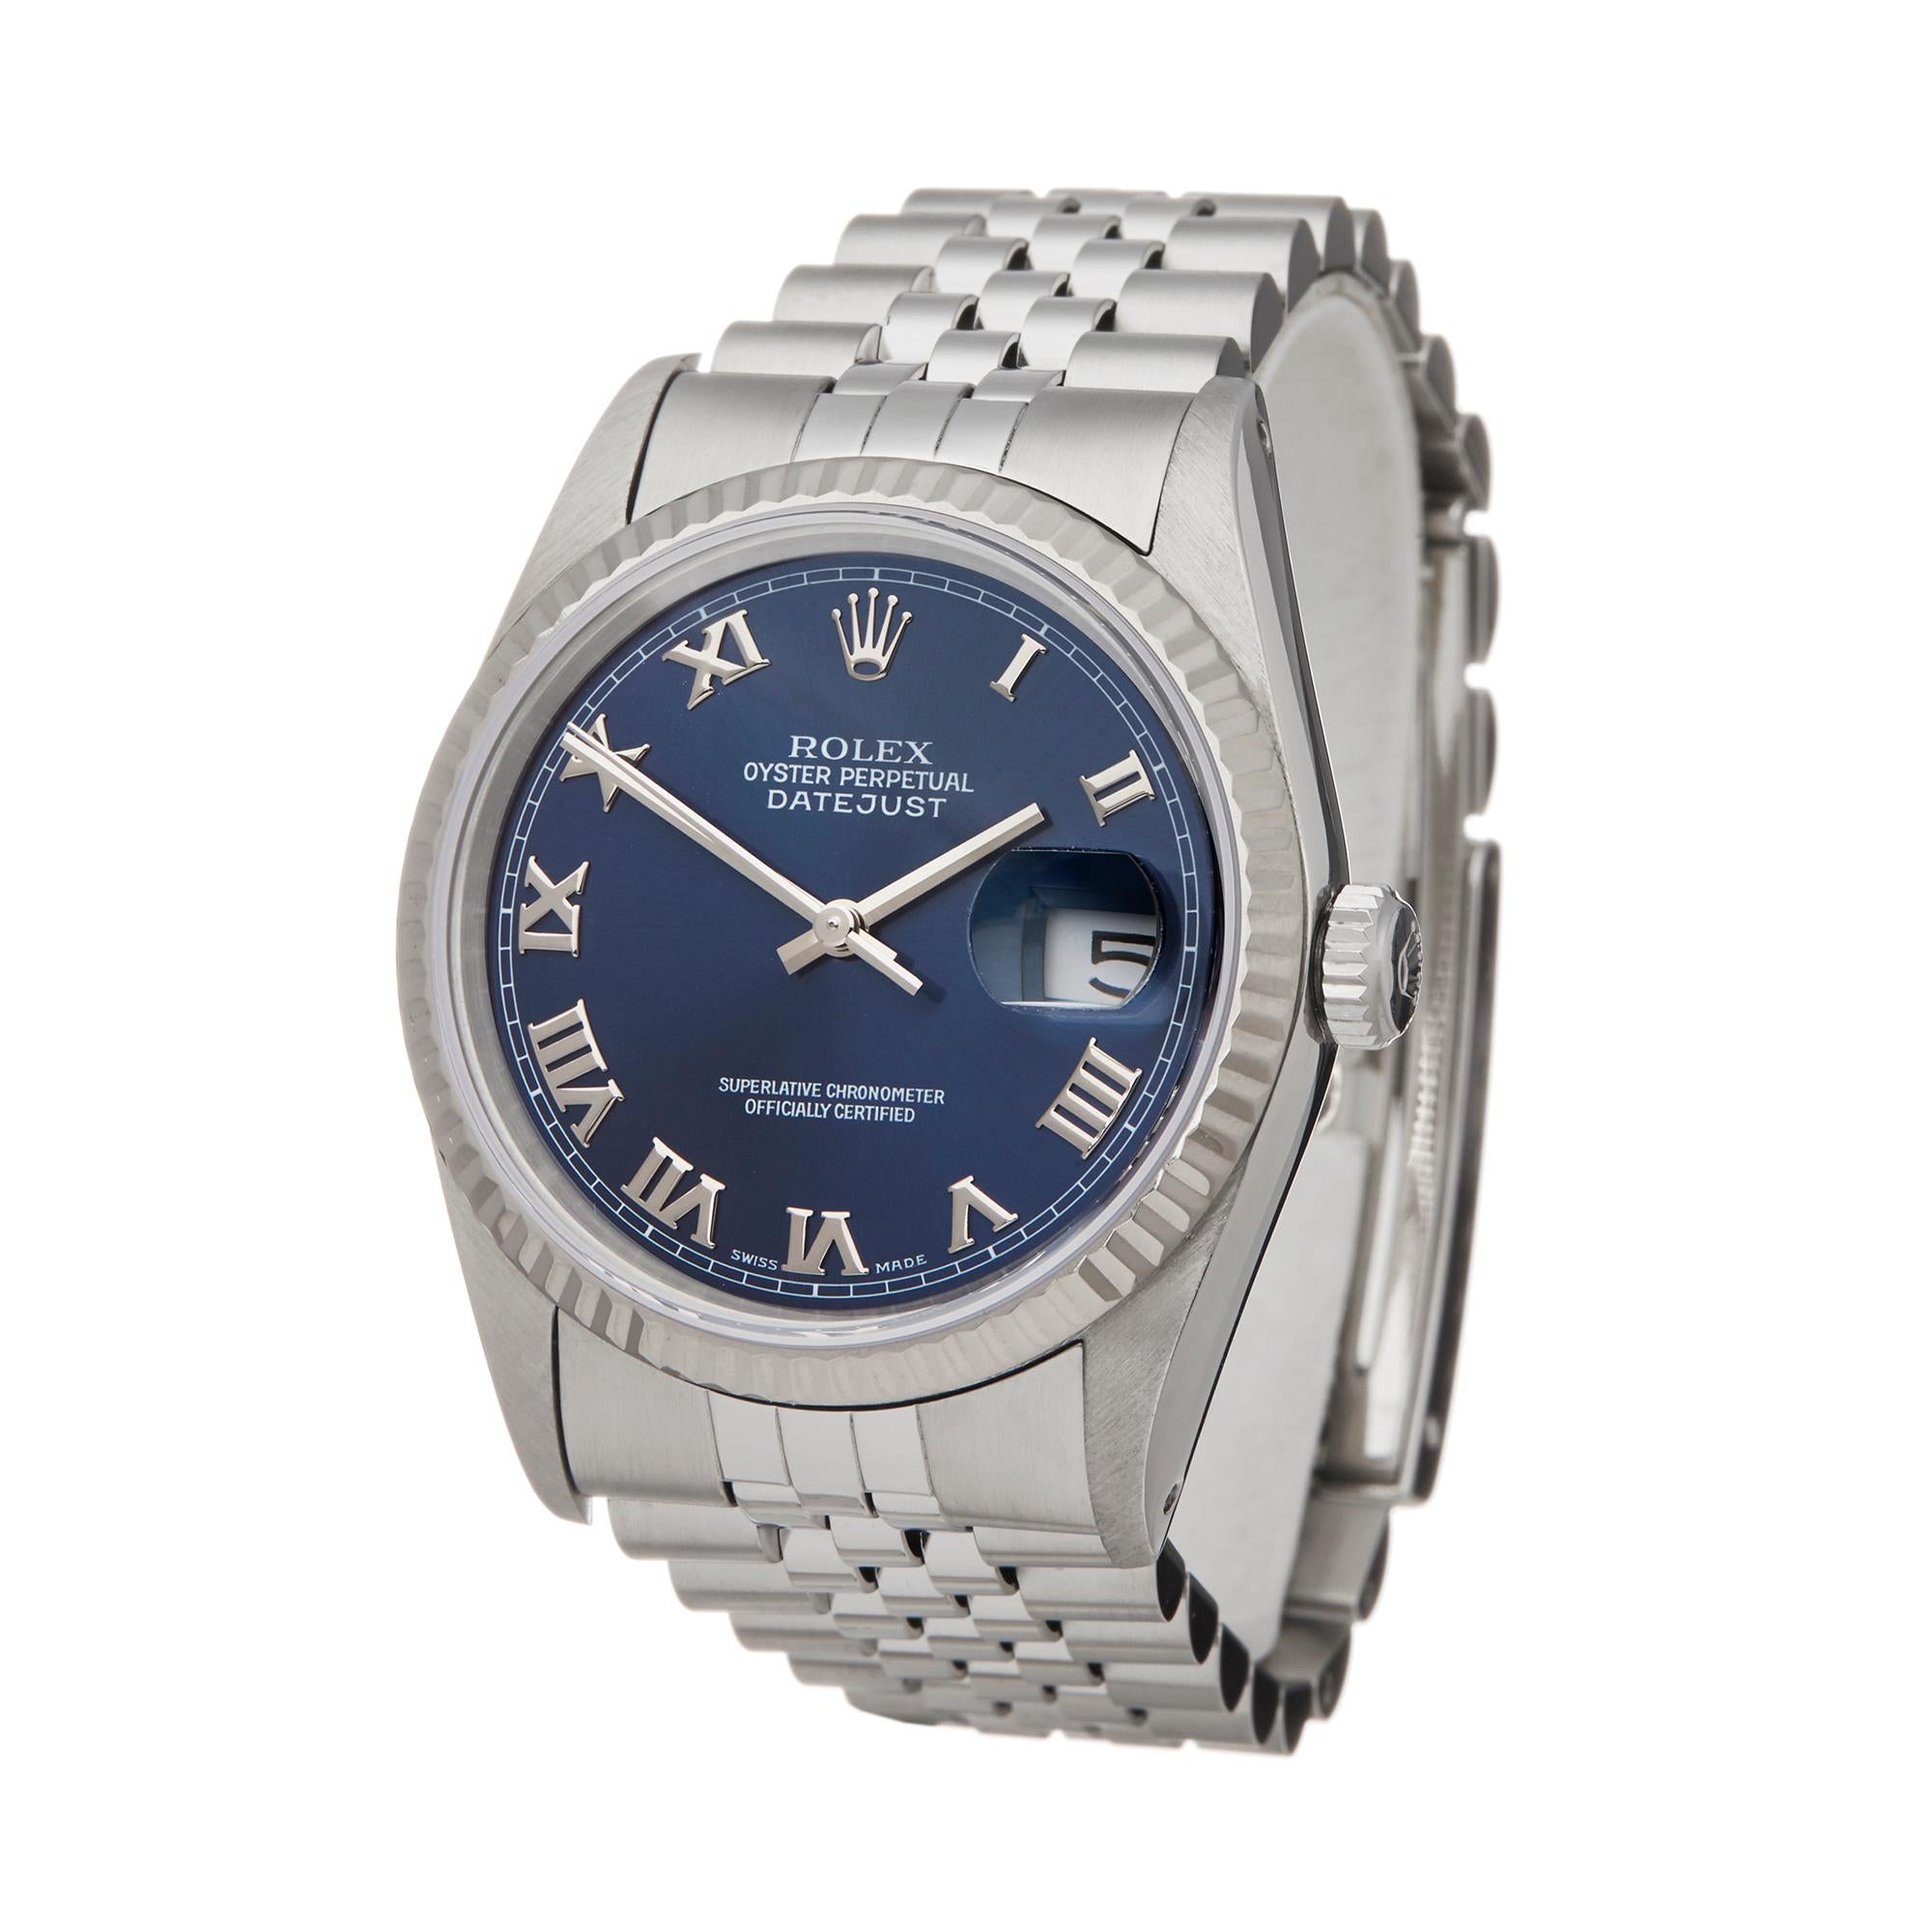 Ref: W5995
Manufacturer: Rolex
Model: Datejust
Model Ref: 16234
Age: Circa 1991
Gender: Mens
Complete With: Box & Guarantee Only 
Dial: Blue Roman
Glass: Sapphire Crystal
Movement: Automatic
Water Resistance: To Manufacturers Specifications
Case: